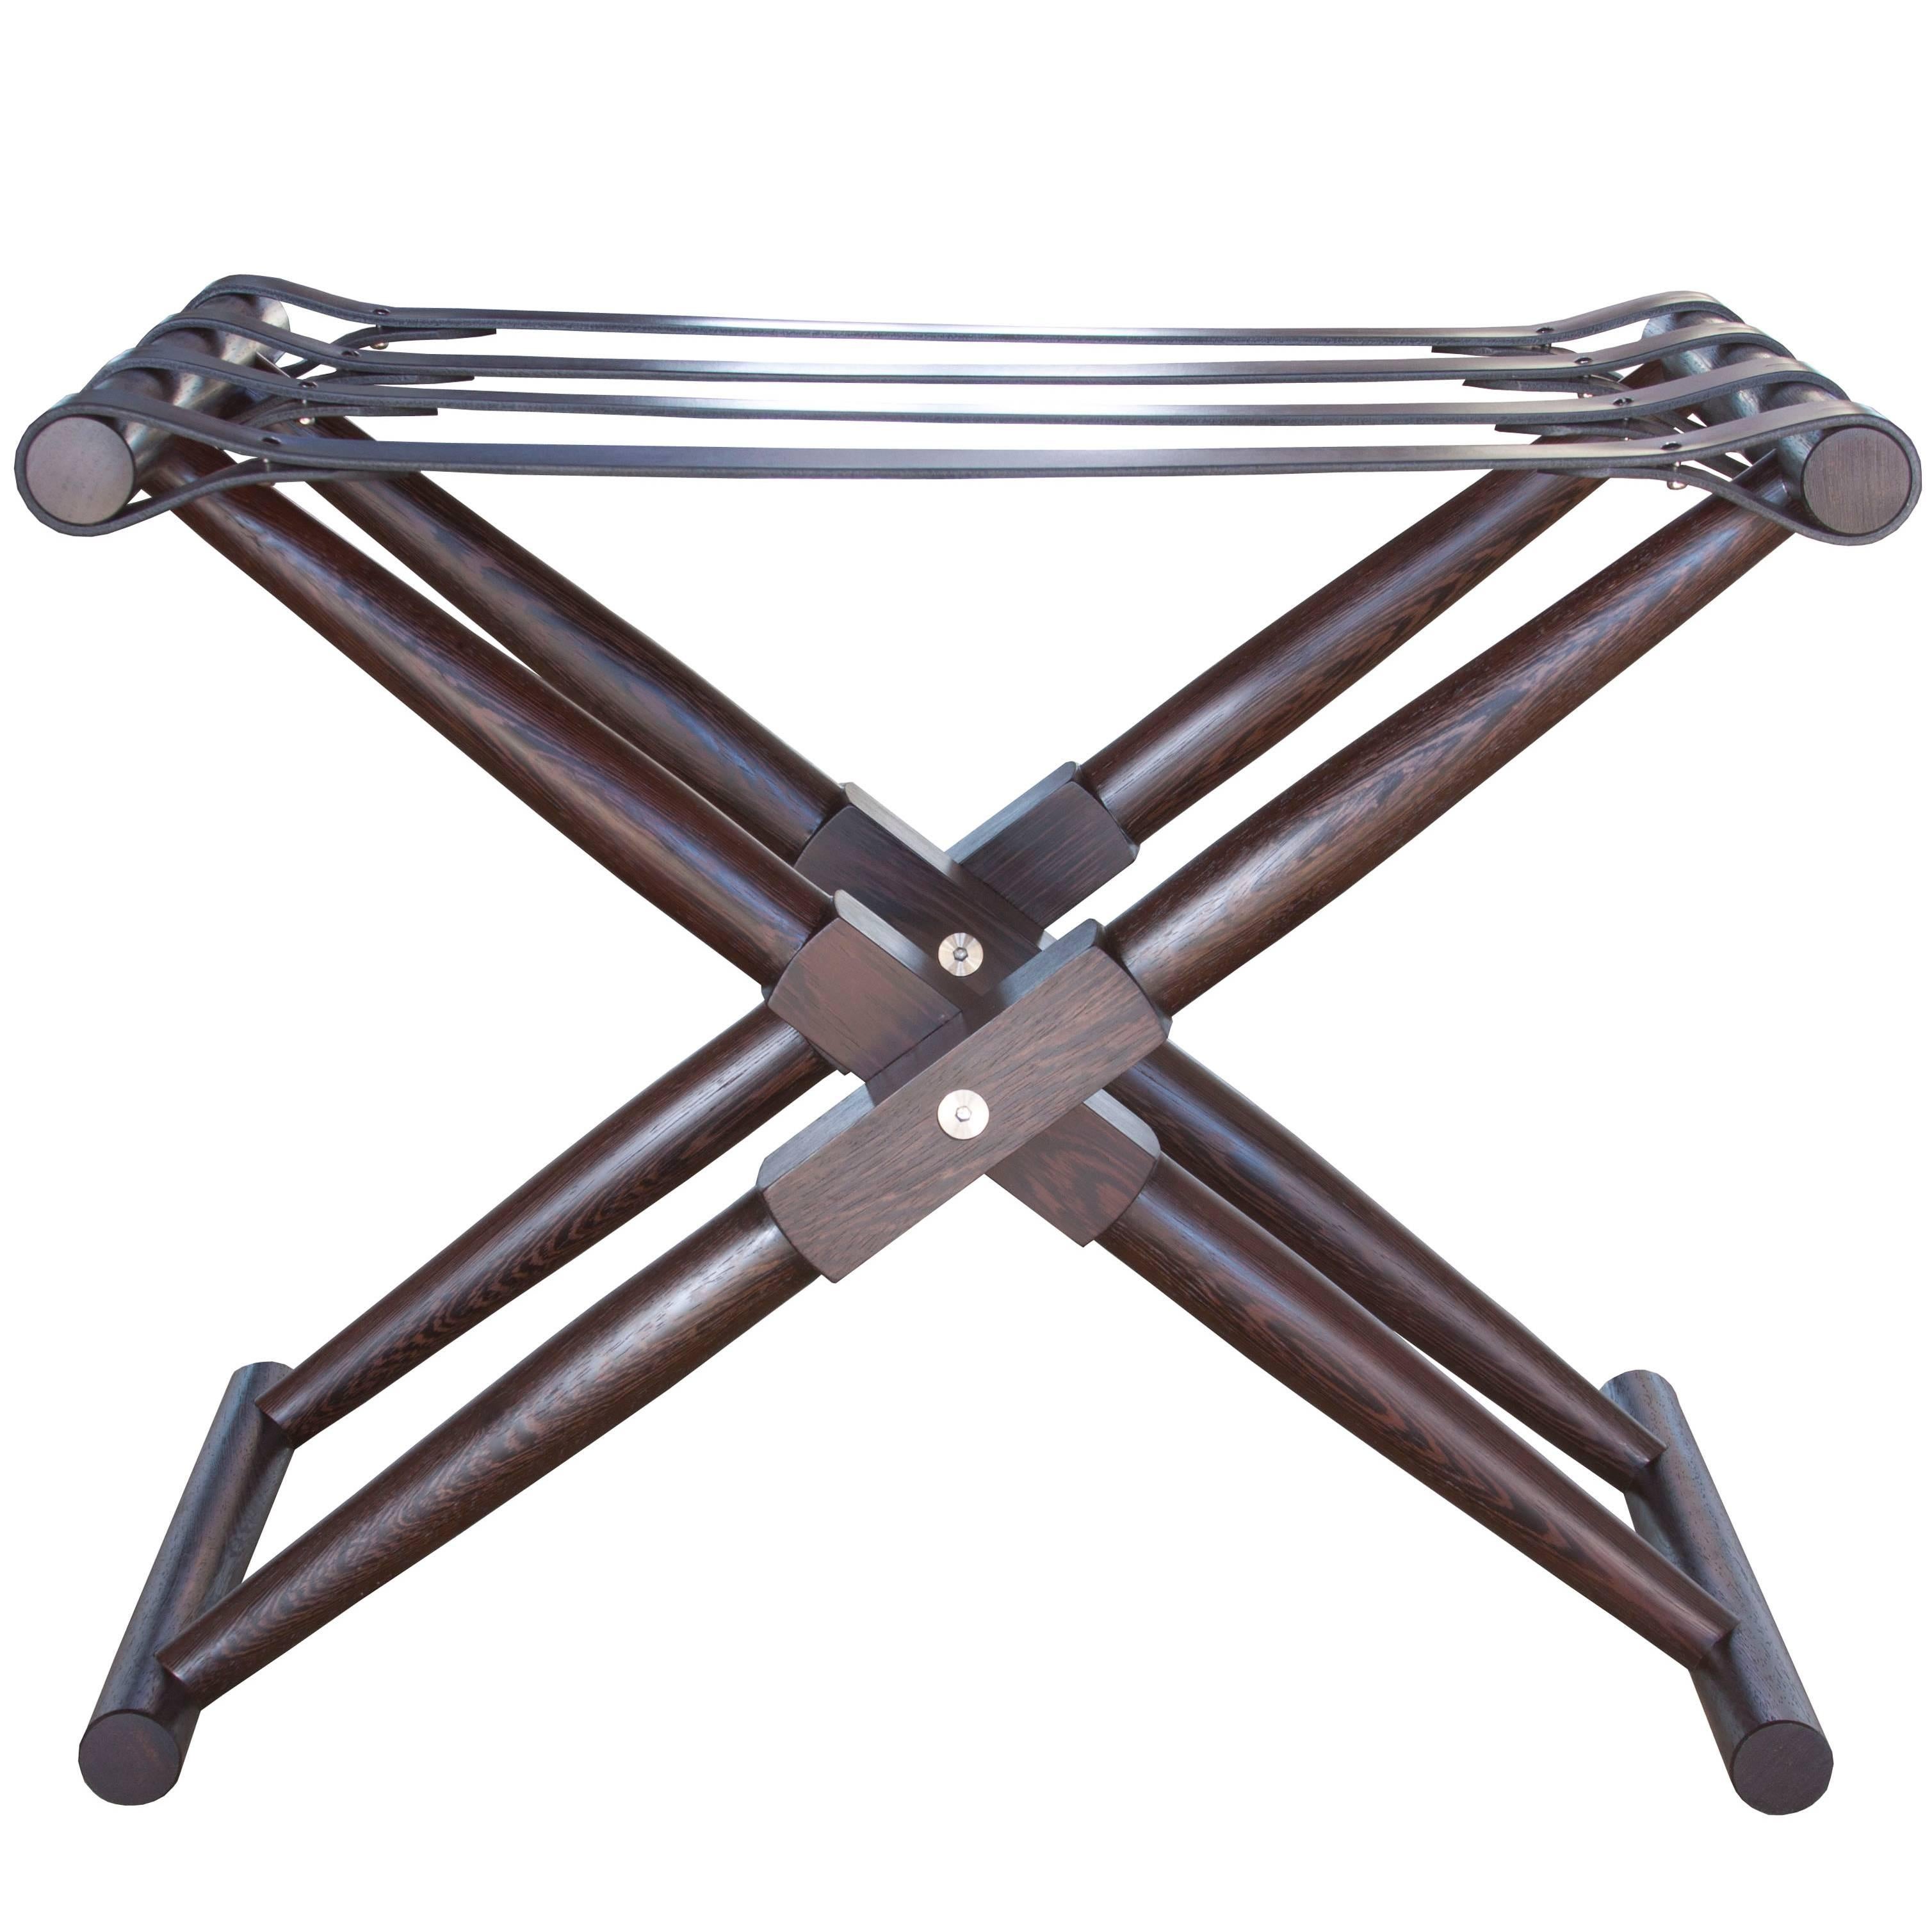 Large Matthiessen Folding Luggage Rack - handcrafted by Richard Wrightman Design